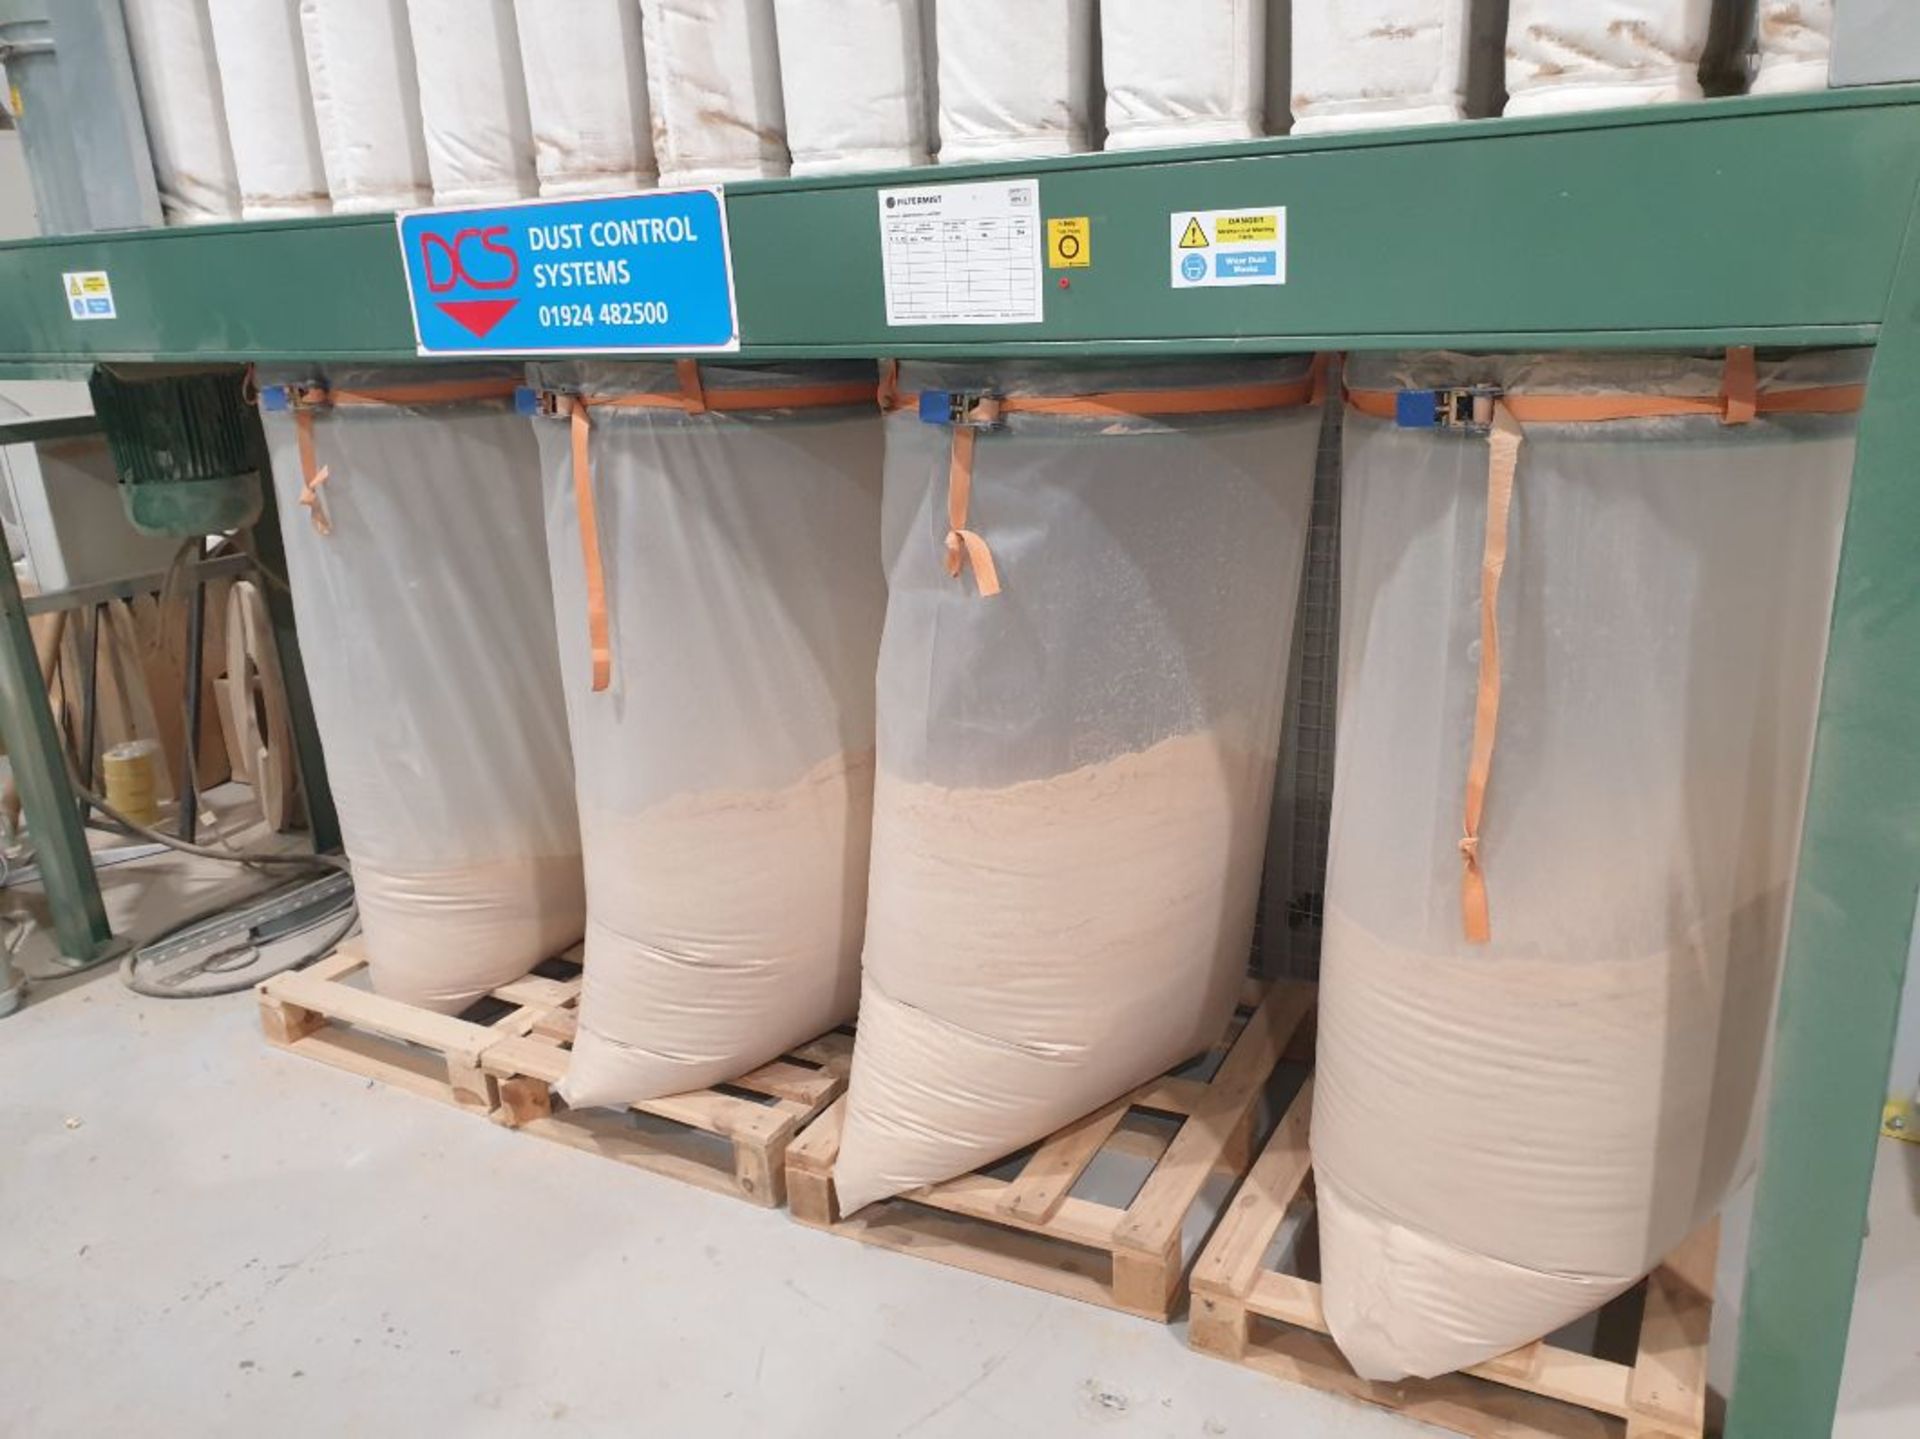 DCS MK4M 4 Bag Dust Extraction Filter Unit, Serial No. 1765, Year of Manufacture 2019, with Shaker & - Image 2 of 3